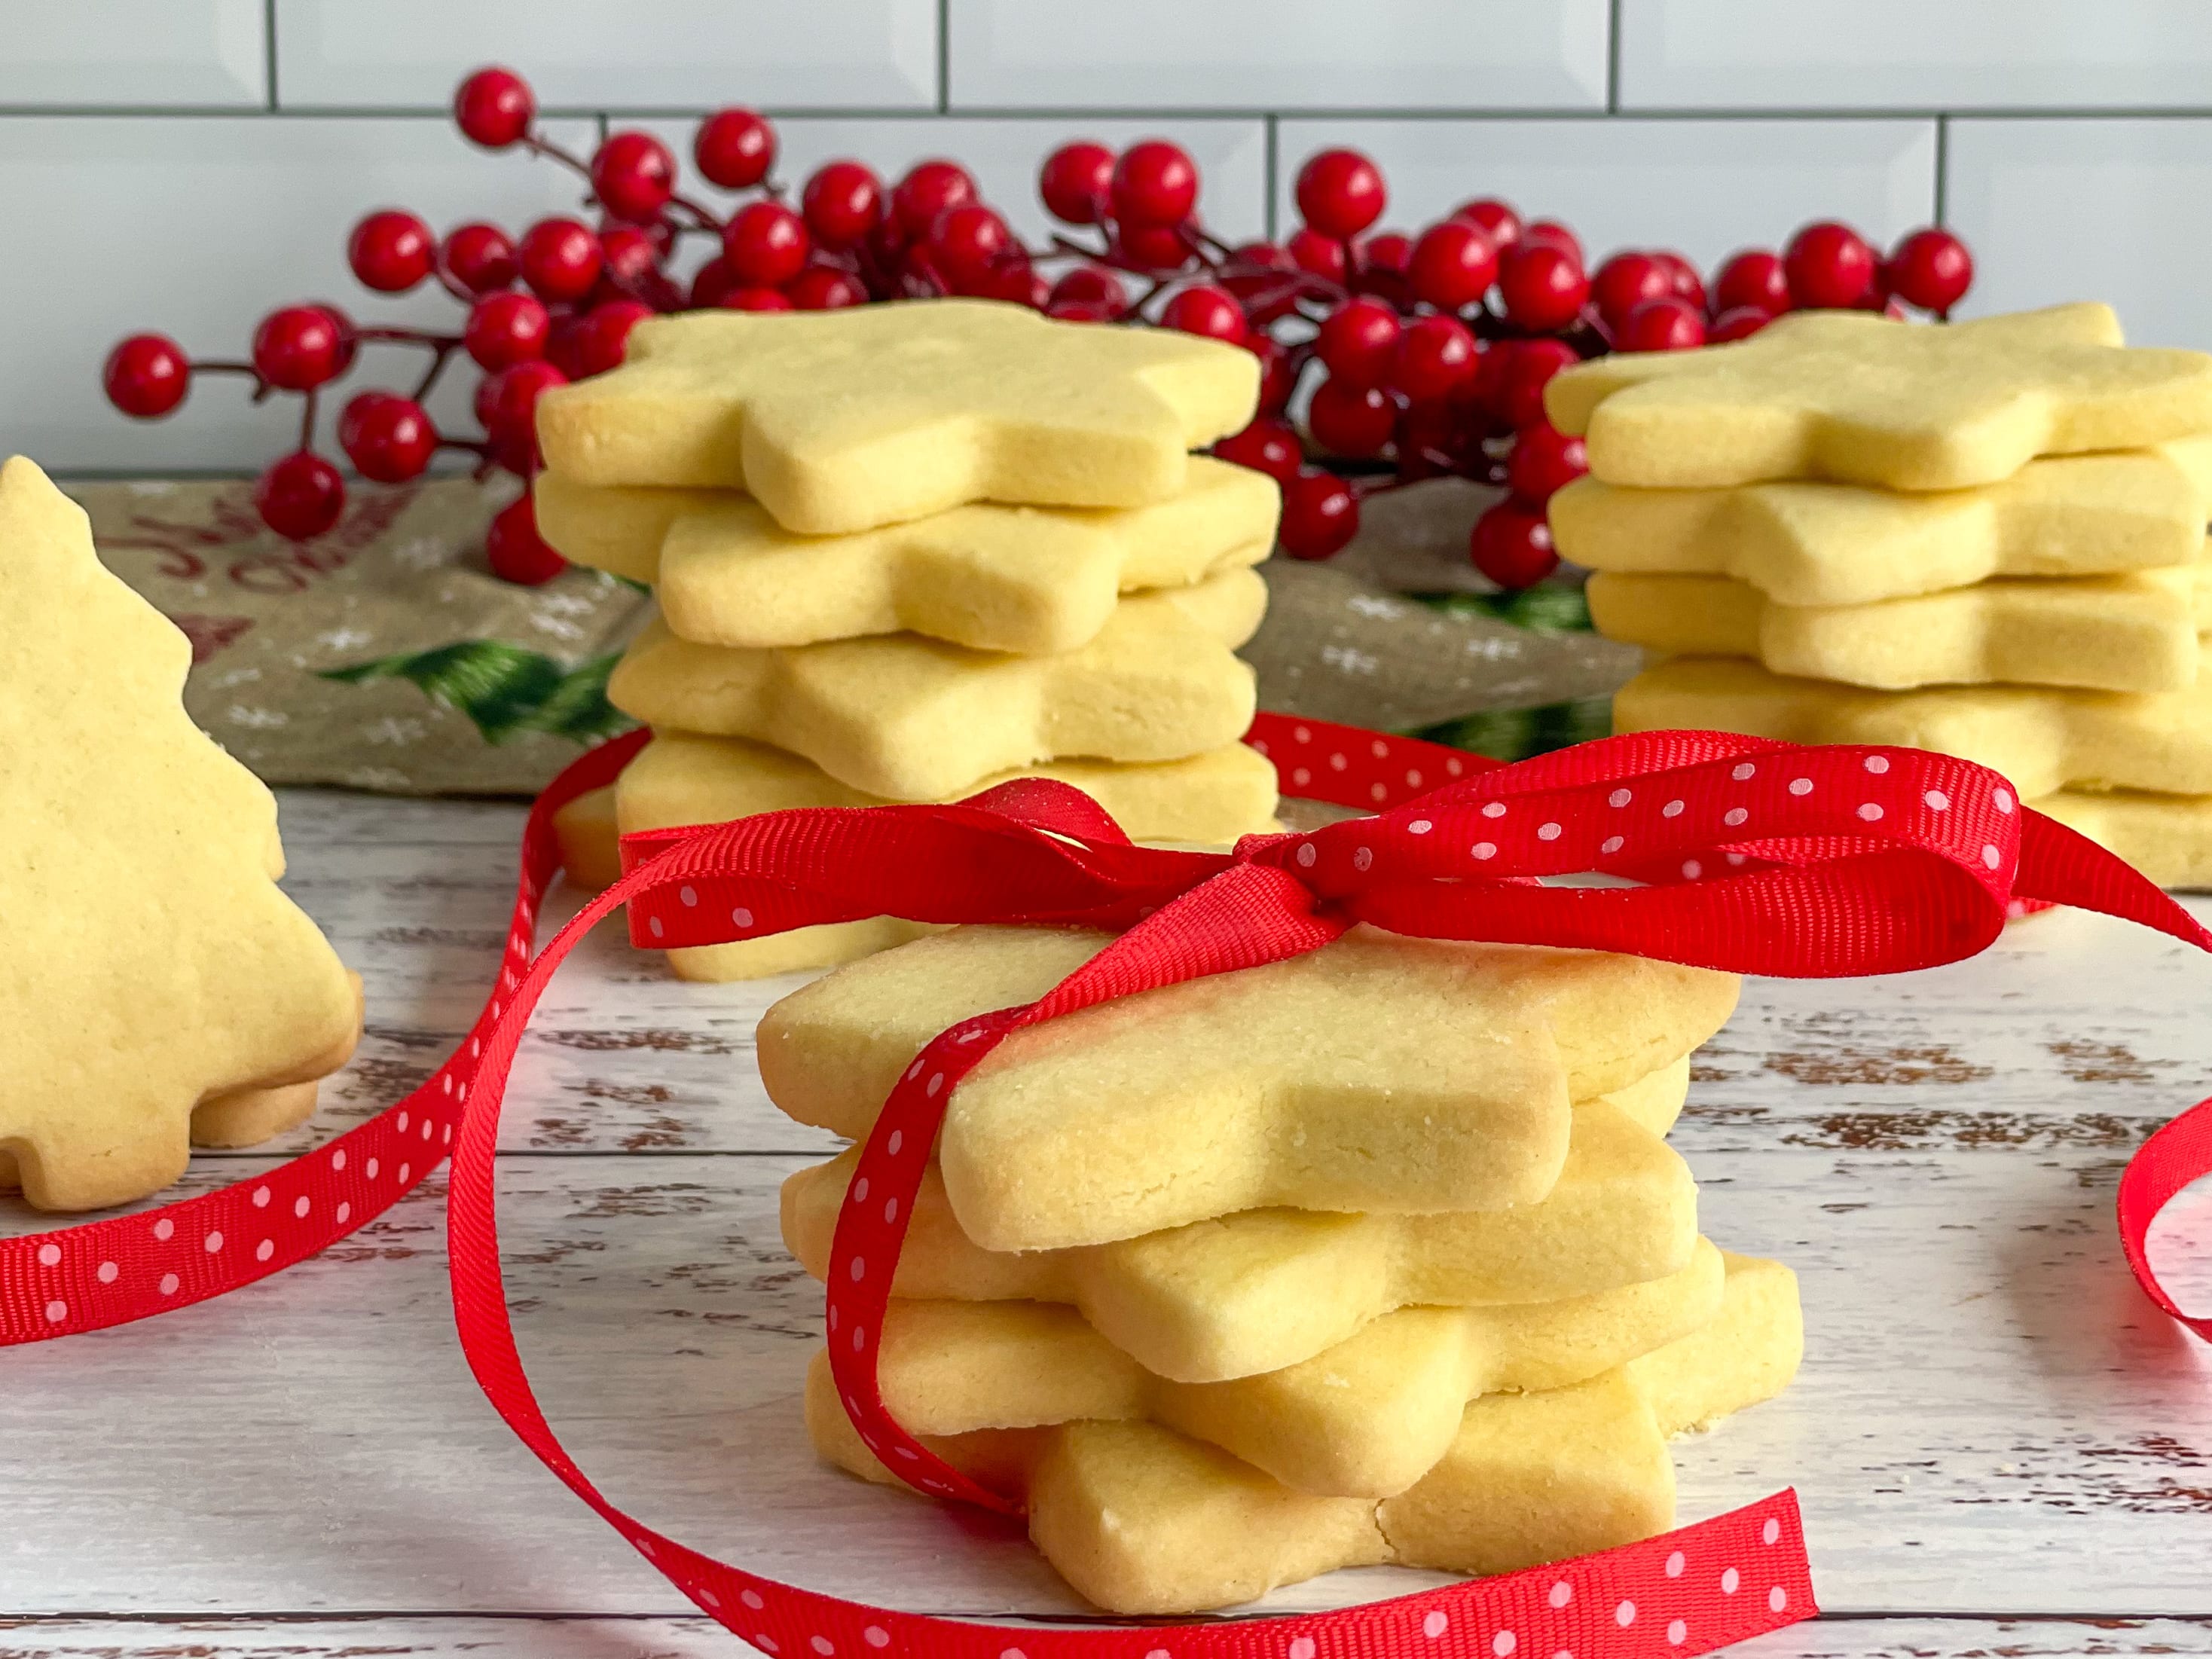 Traditional moulded shortbread – using my Mum's shortbread mould